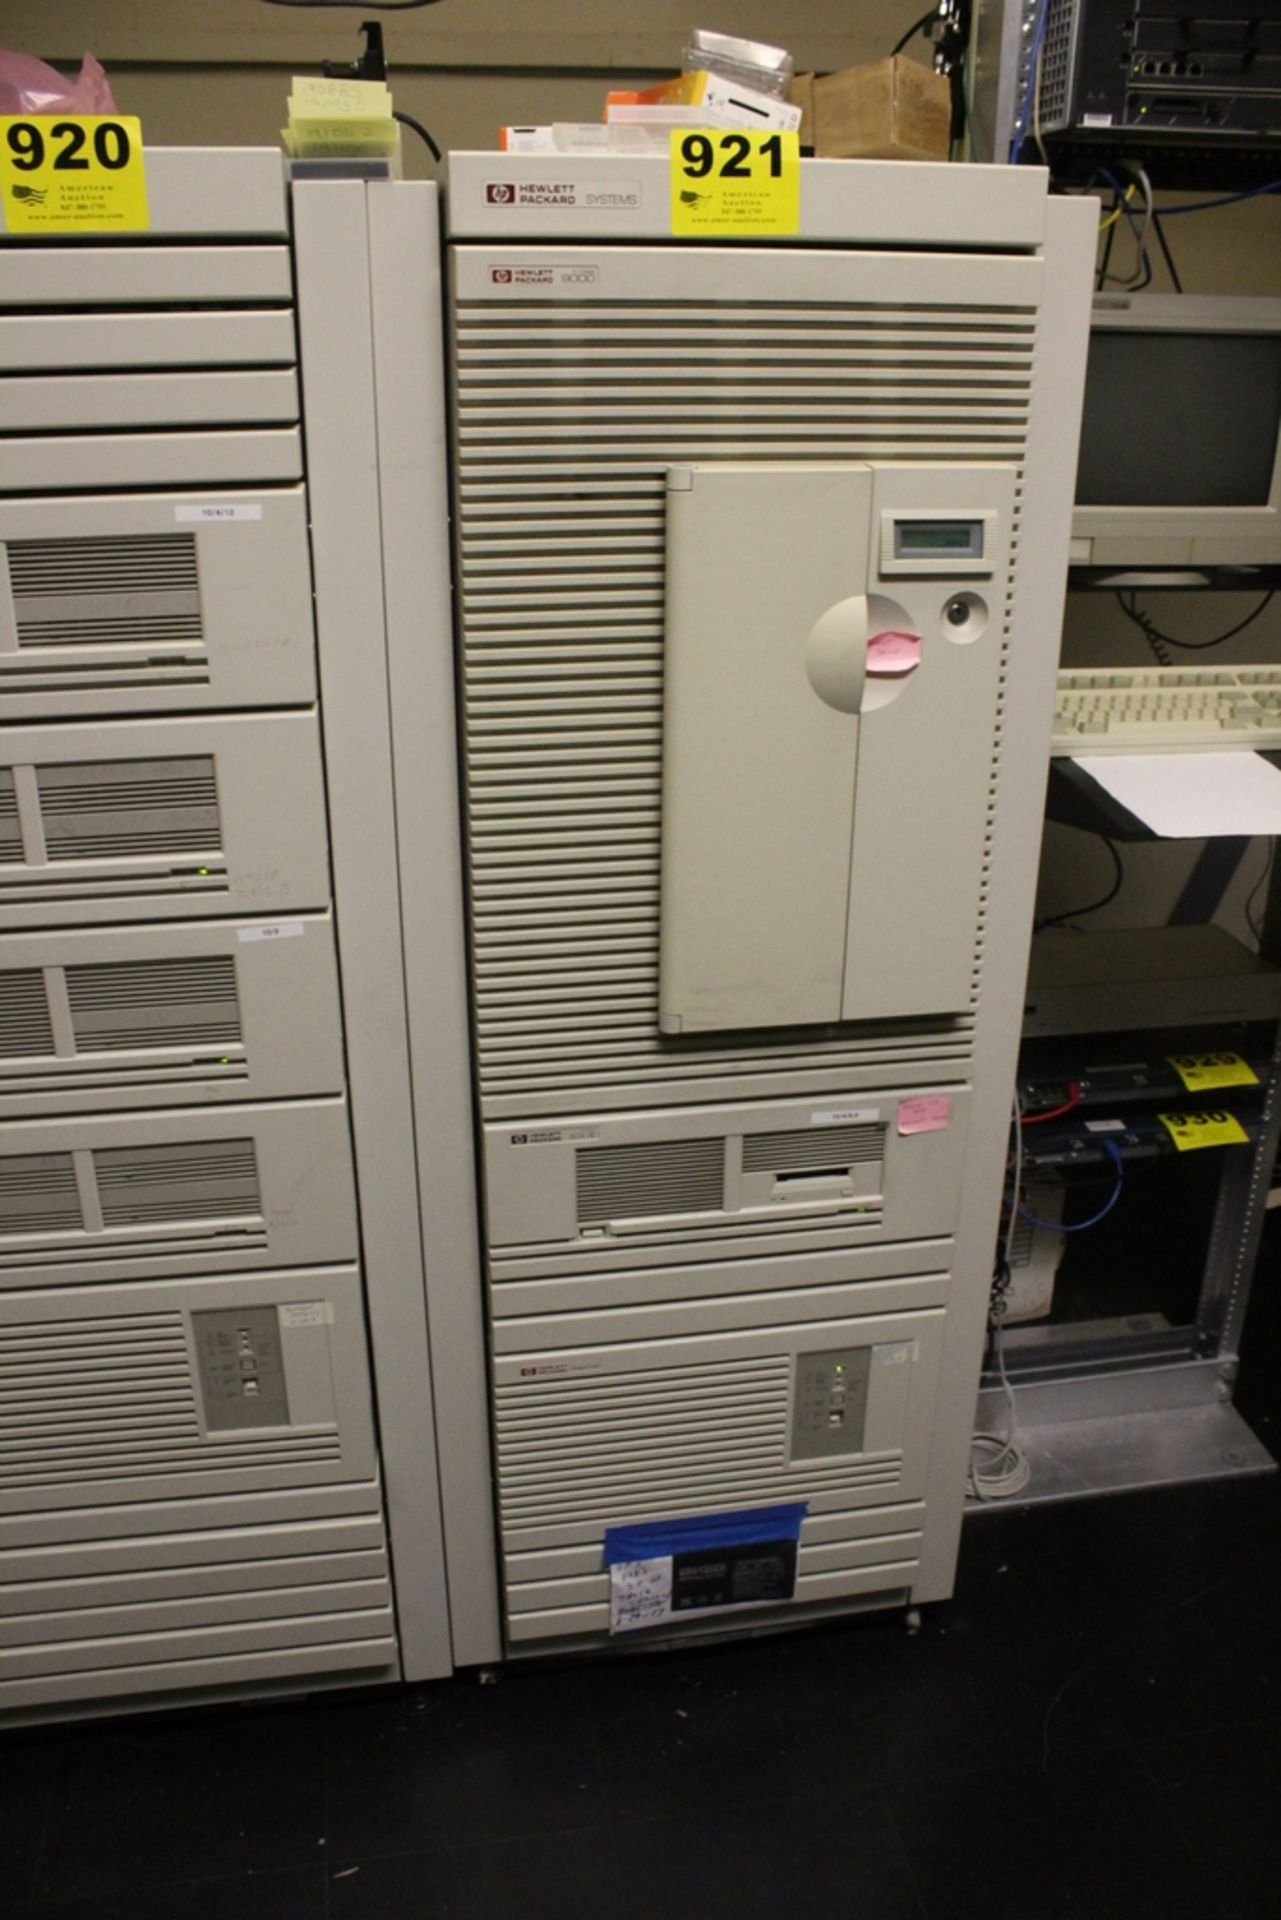 HEWLETT PACKARD SERVER SYSTEM WITH K-CLASS 9000, SCSI SE AND POWER TRUST - Image 2 of 6